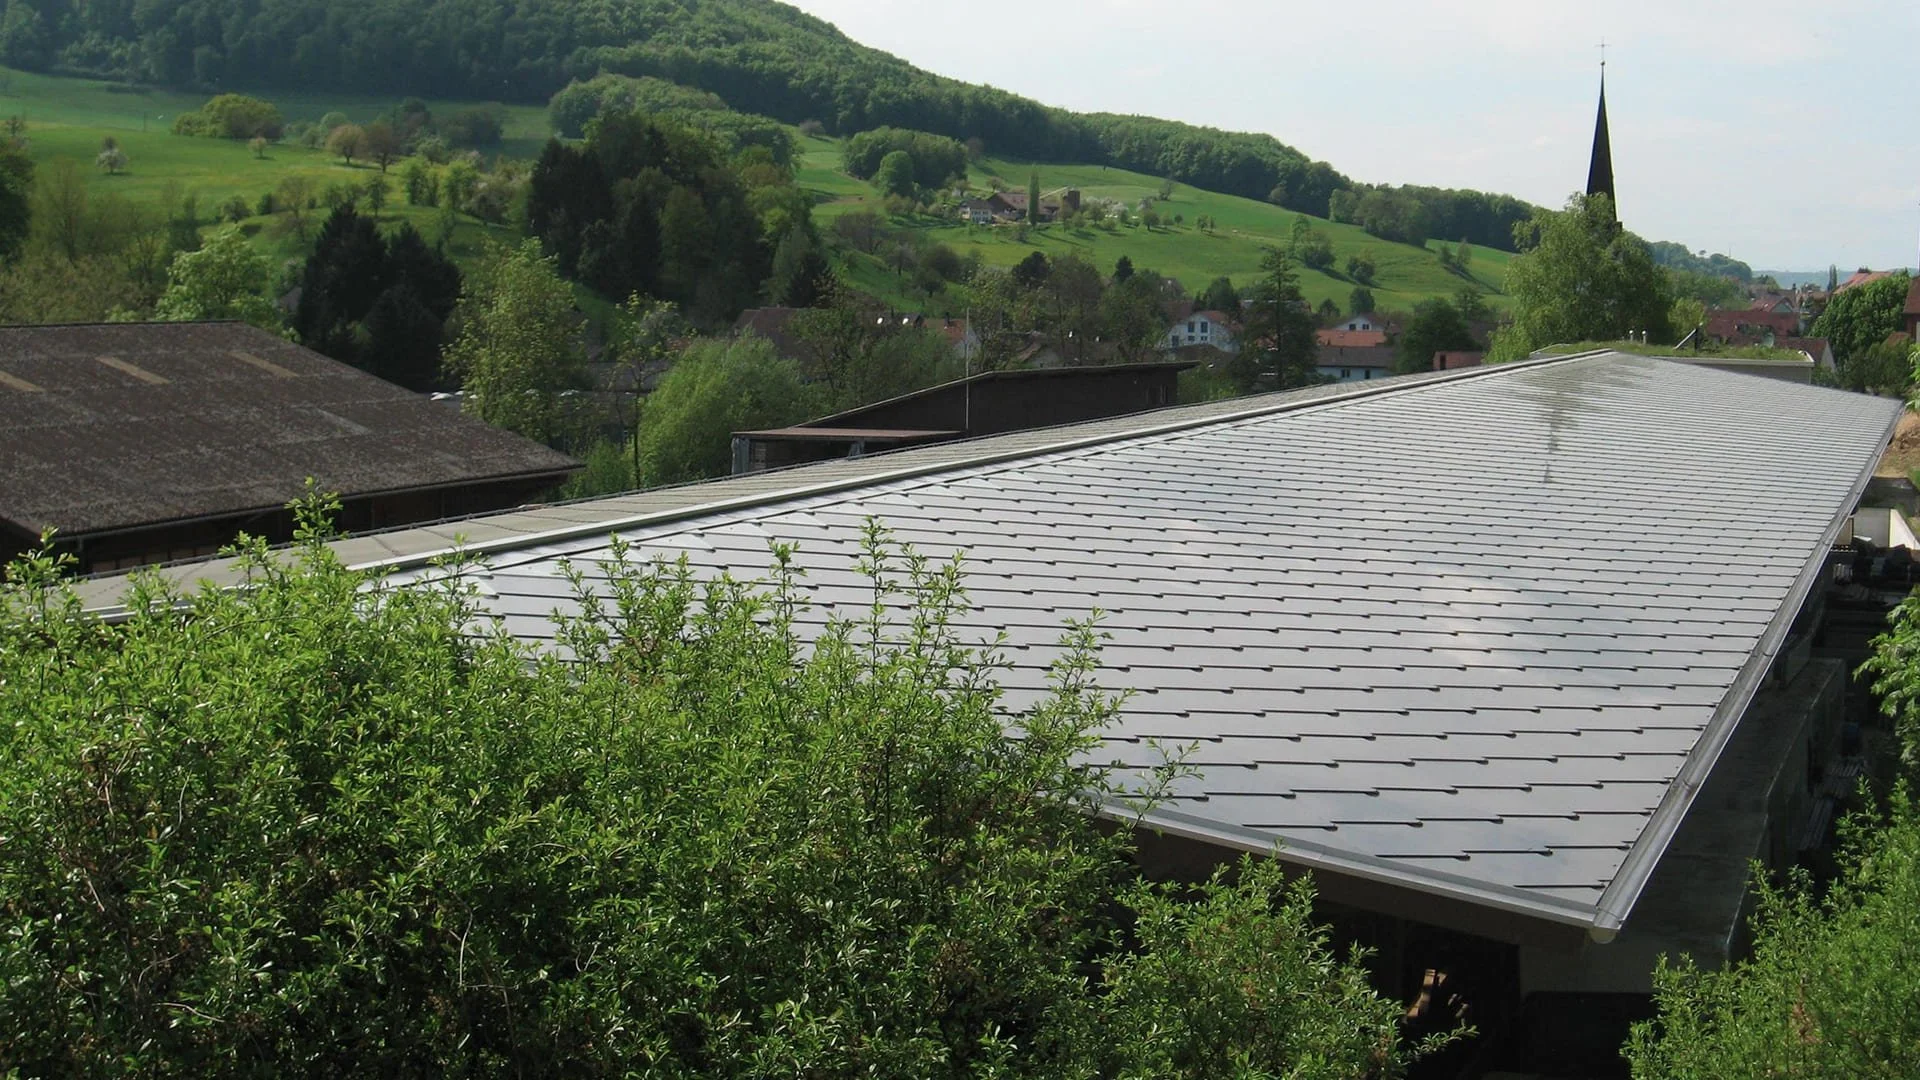 SunStyle solar tiles creating a solar roof on this industrial building that generates power for an indoor plant nursery